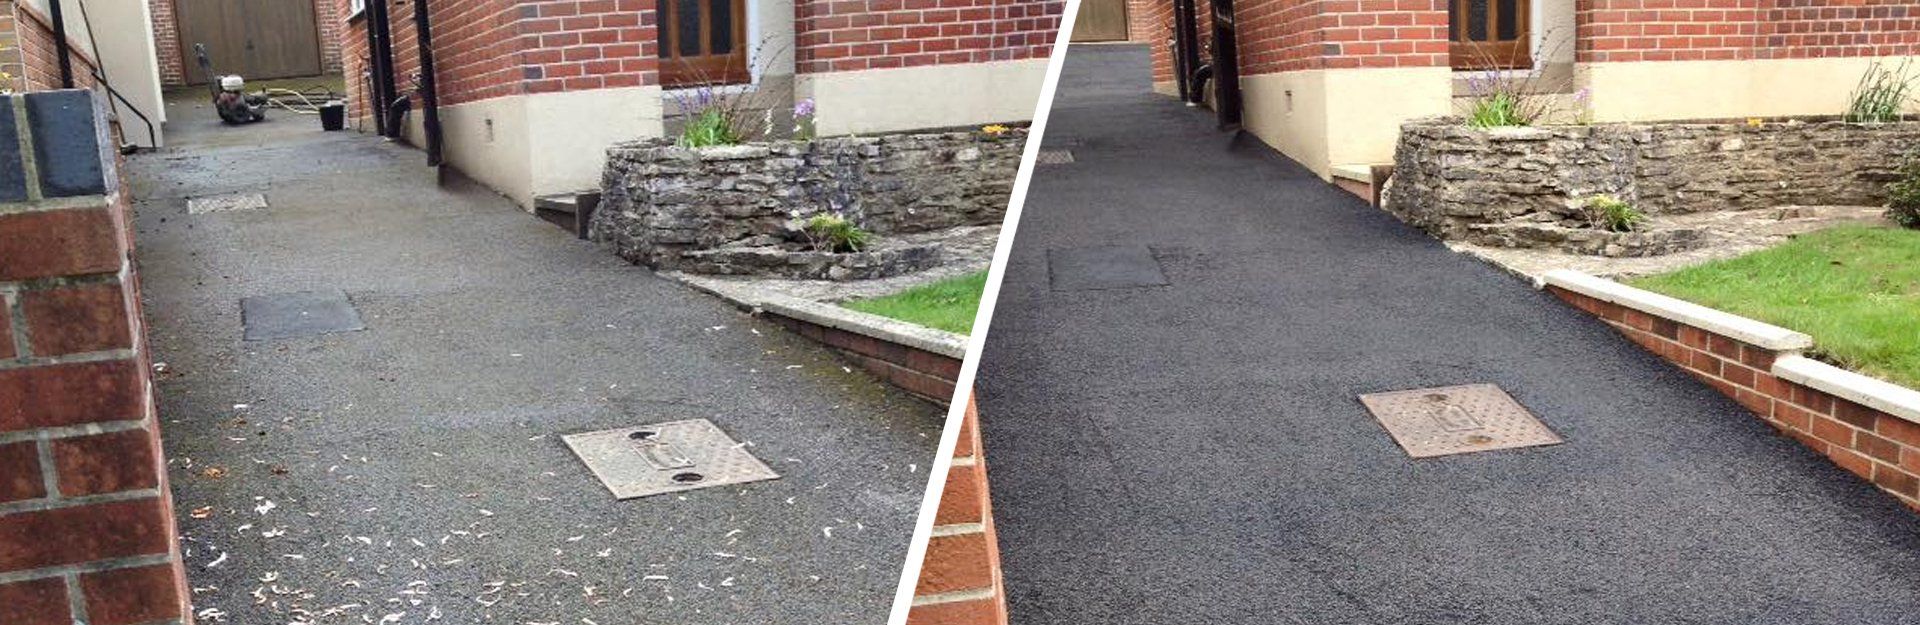 Tarmac driveway restored by All Surface Care